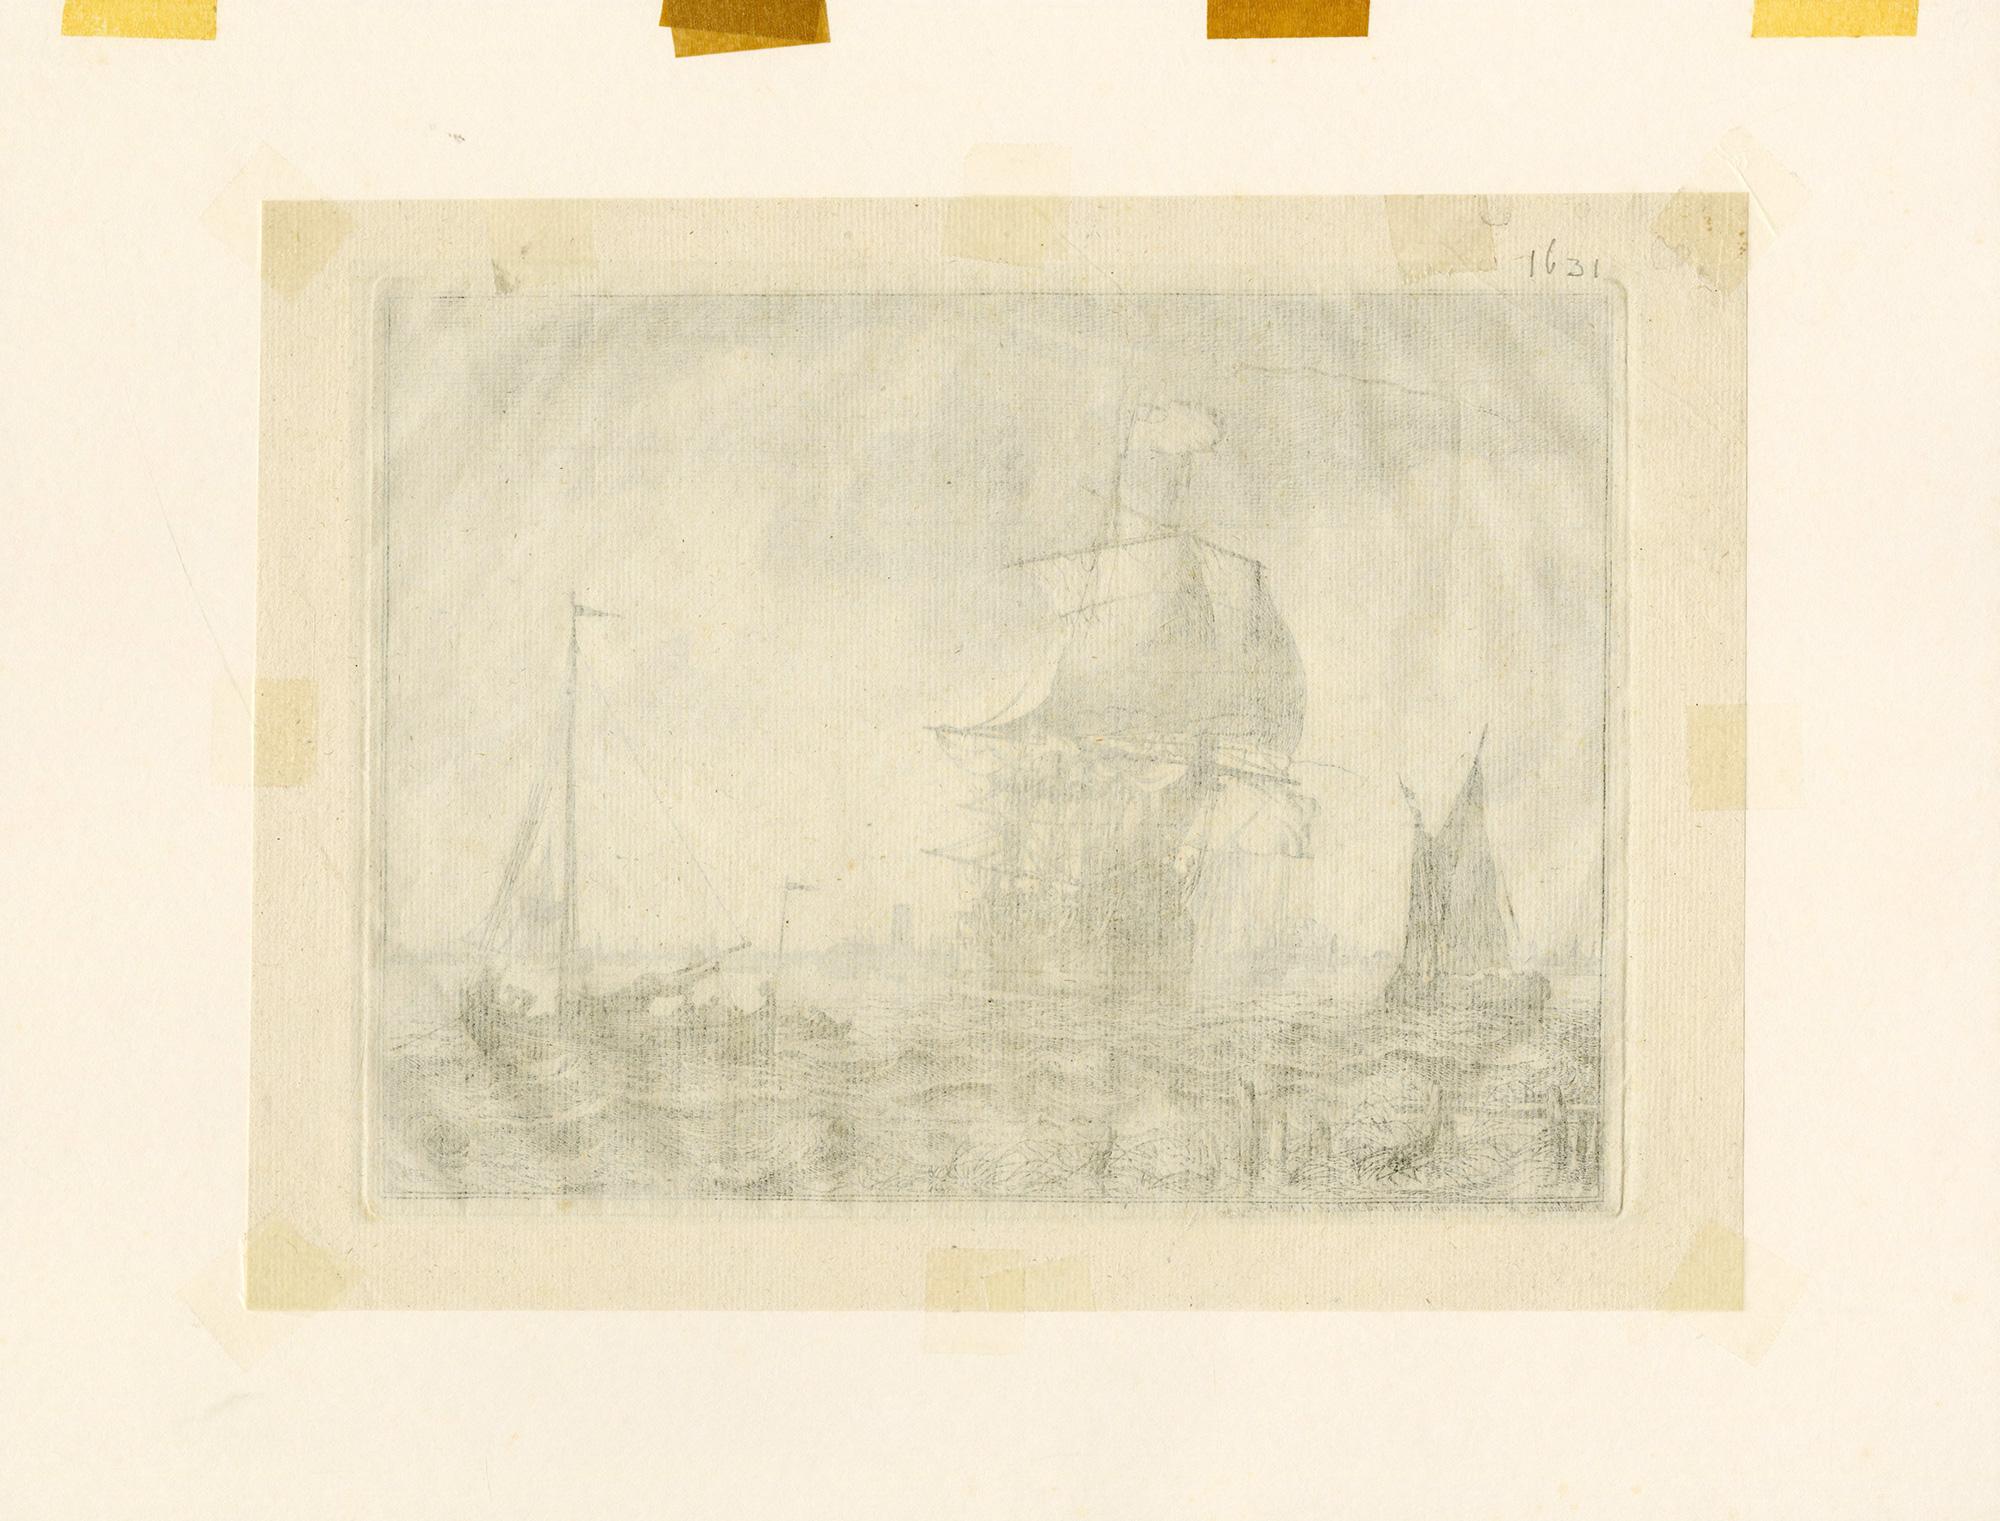 A beautiful 18th century nautical scene filled with movement and activity. 
One etching from the series of 10 lively nautical scenes entitled Seascapes. This image depicts four vessels, from left to right: spritsail-rigged inland vessel, an English